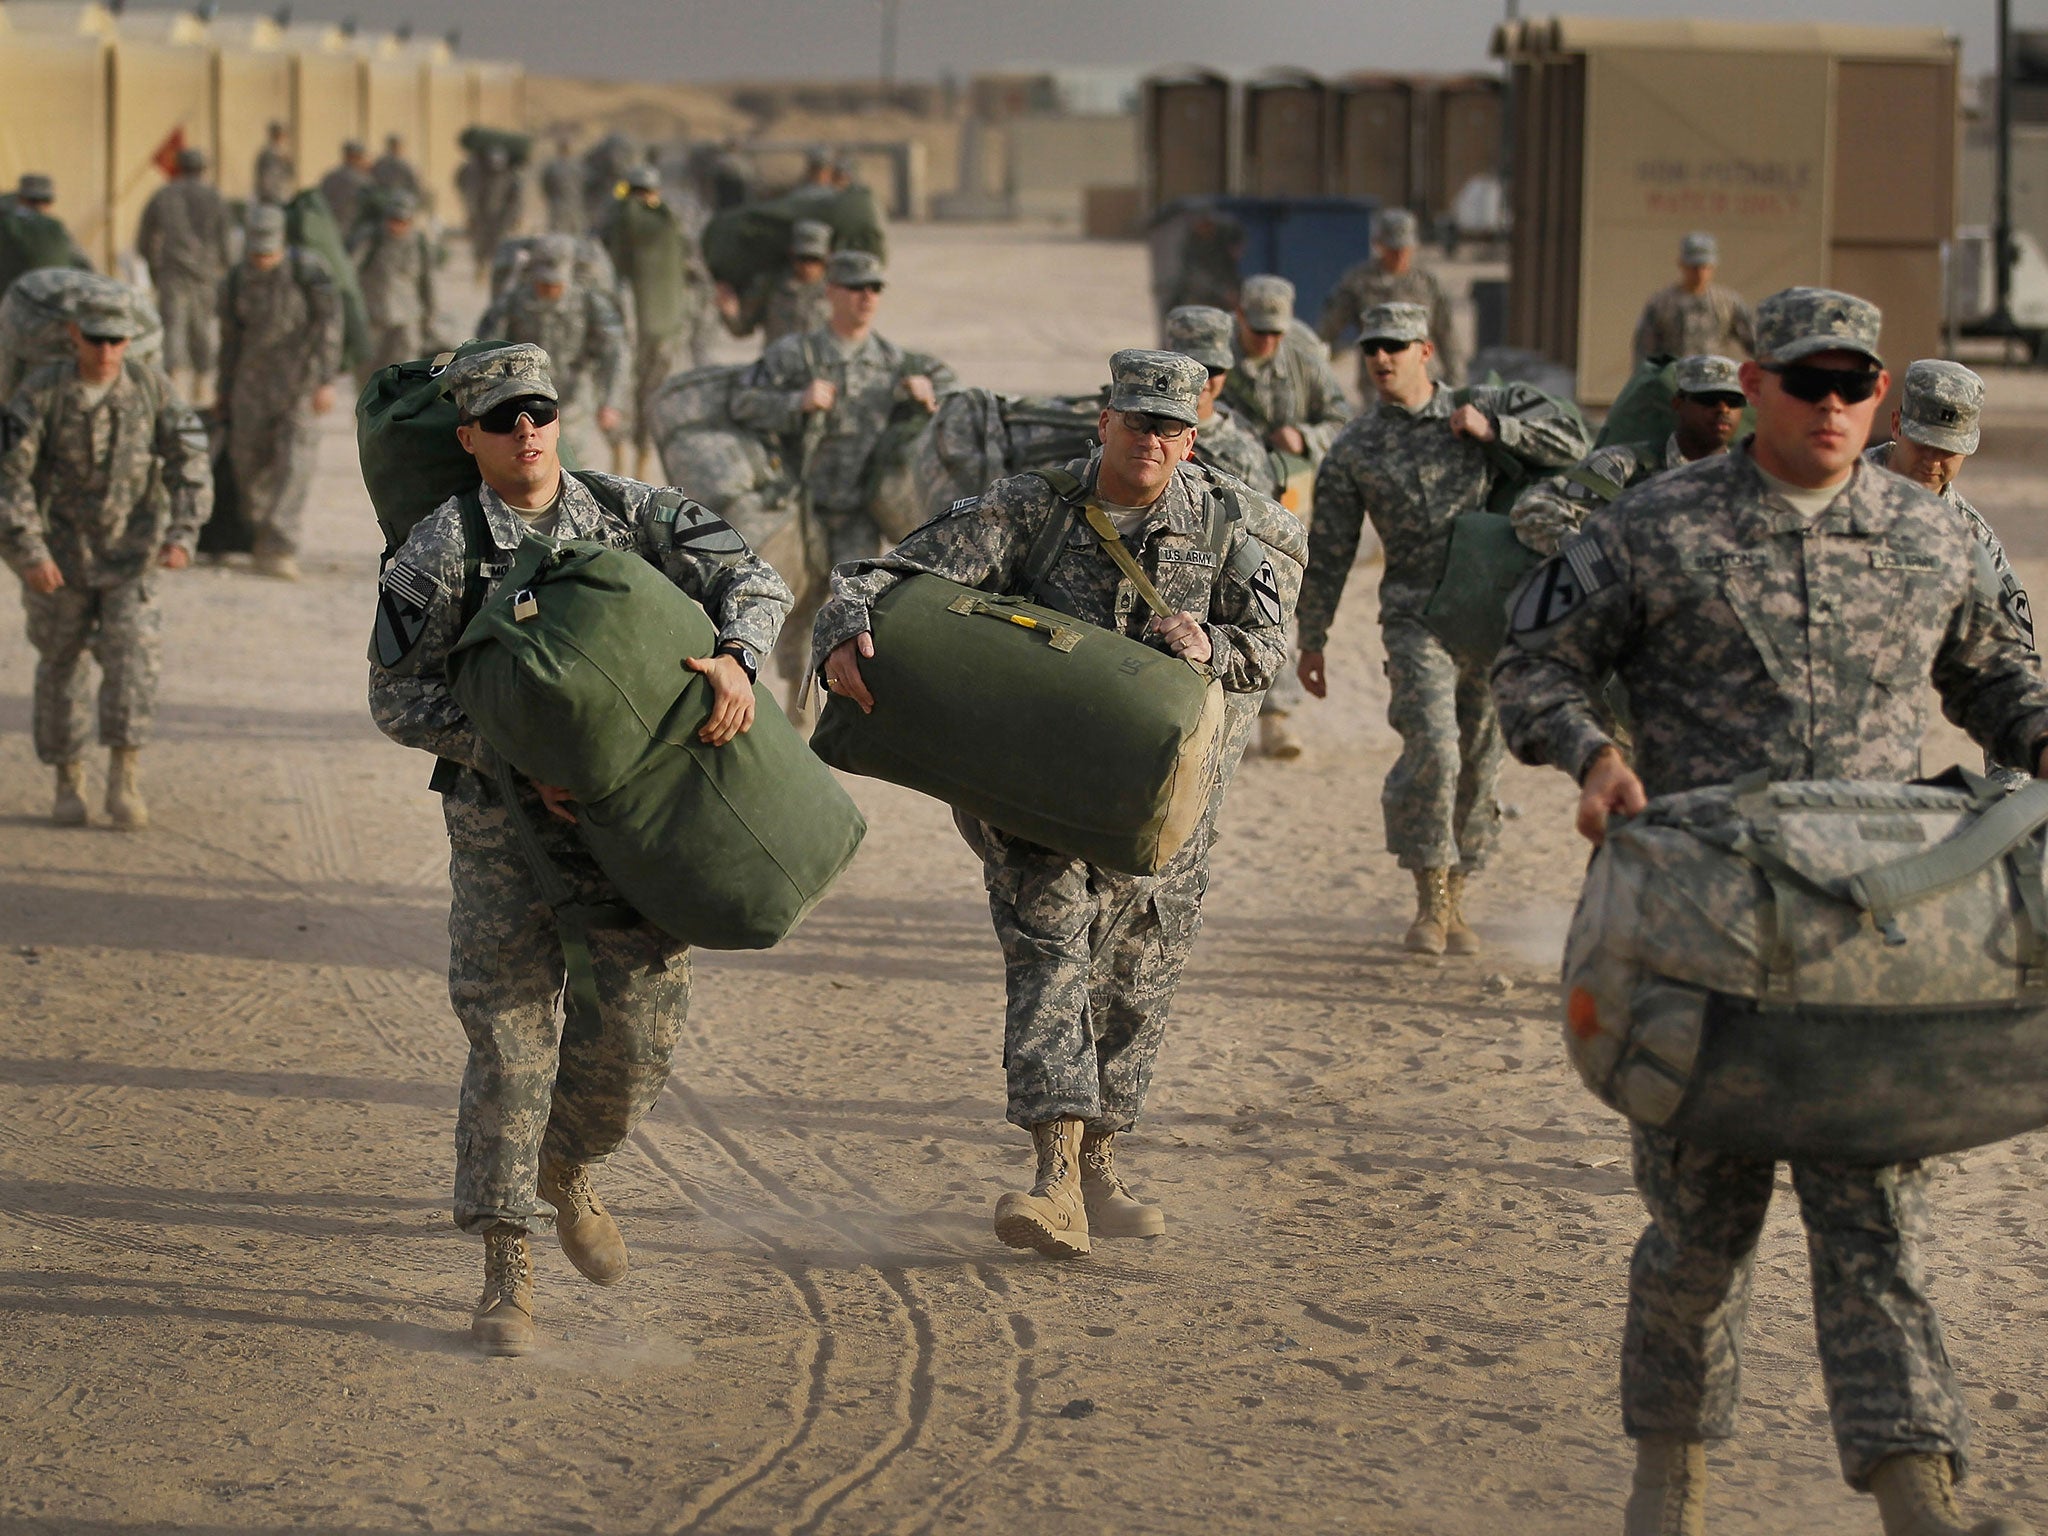 In 2014, President Obama said he would deploy around 300 additional troops to Iraq - bringing the total to 750